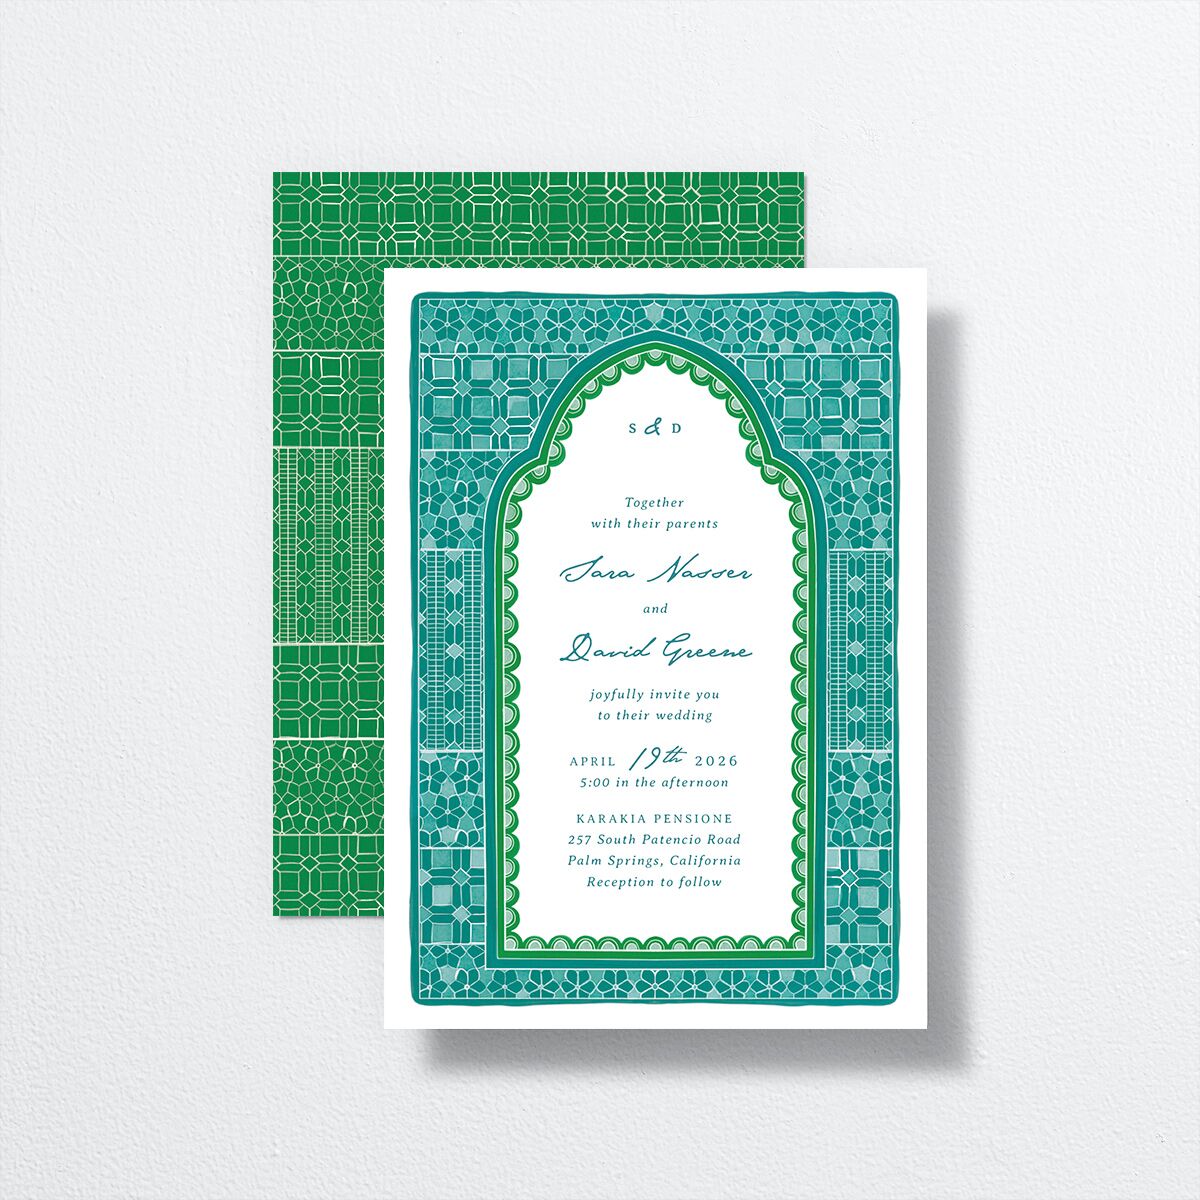 Marrakesh Tile Wedding Invitations front-and-back